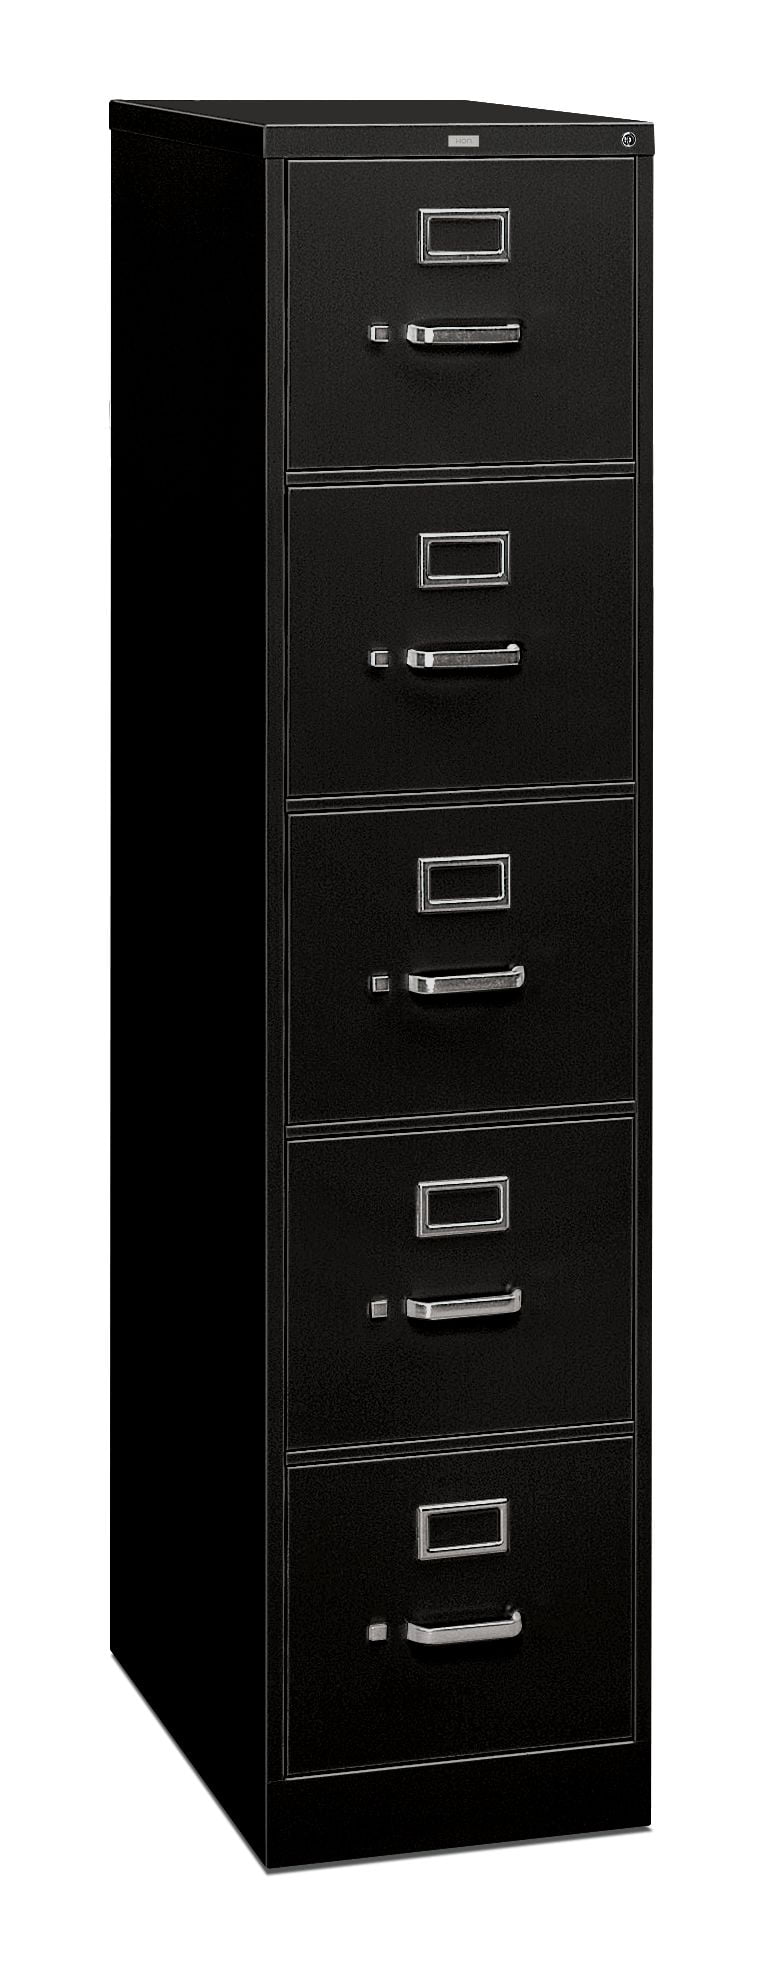 Hon 5 Drawer Filing Cabinet 310 Series Full Suspension Legal File 26 1 2 Inch Drawers Black 315cpp Com